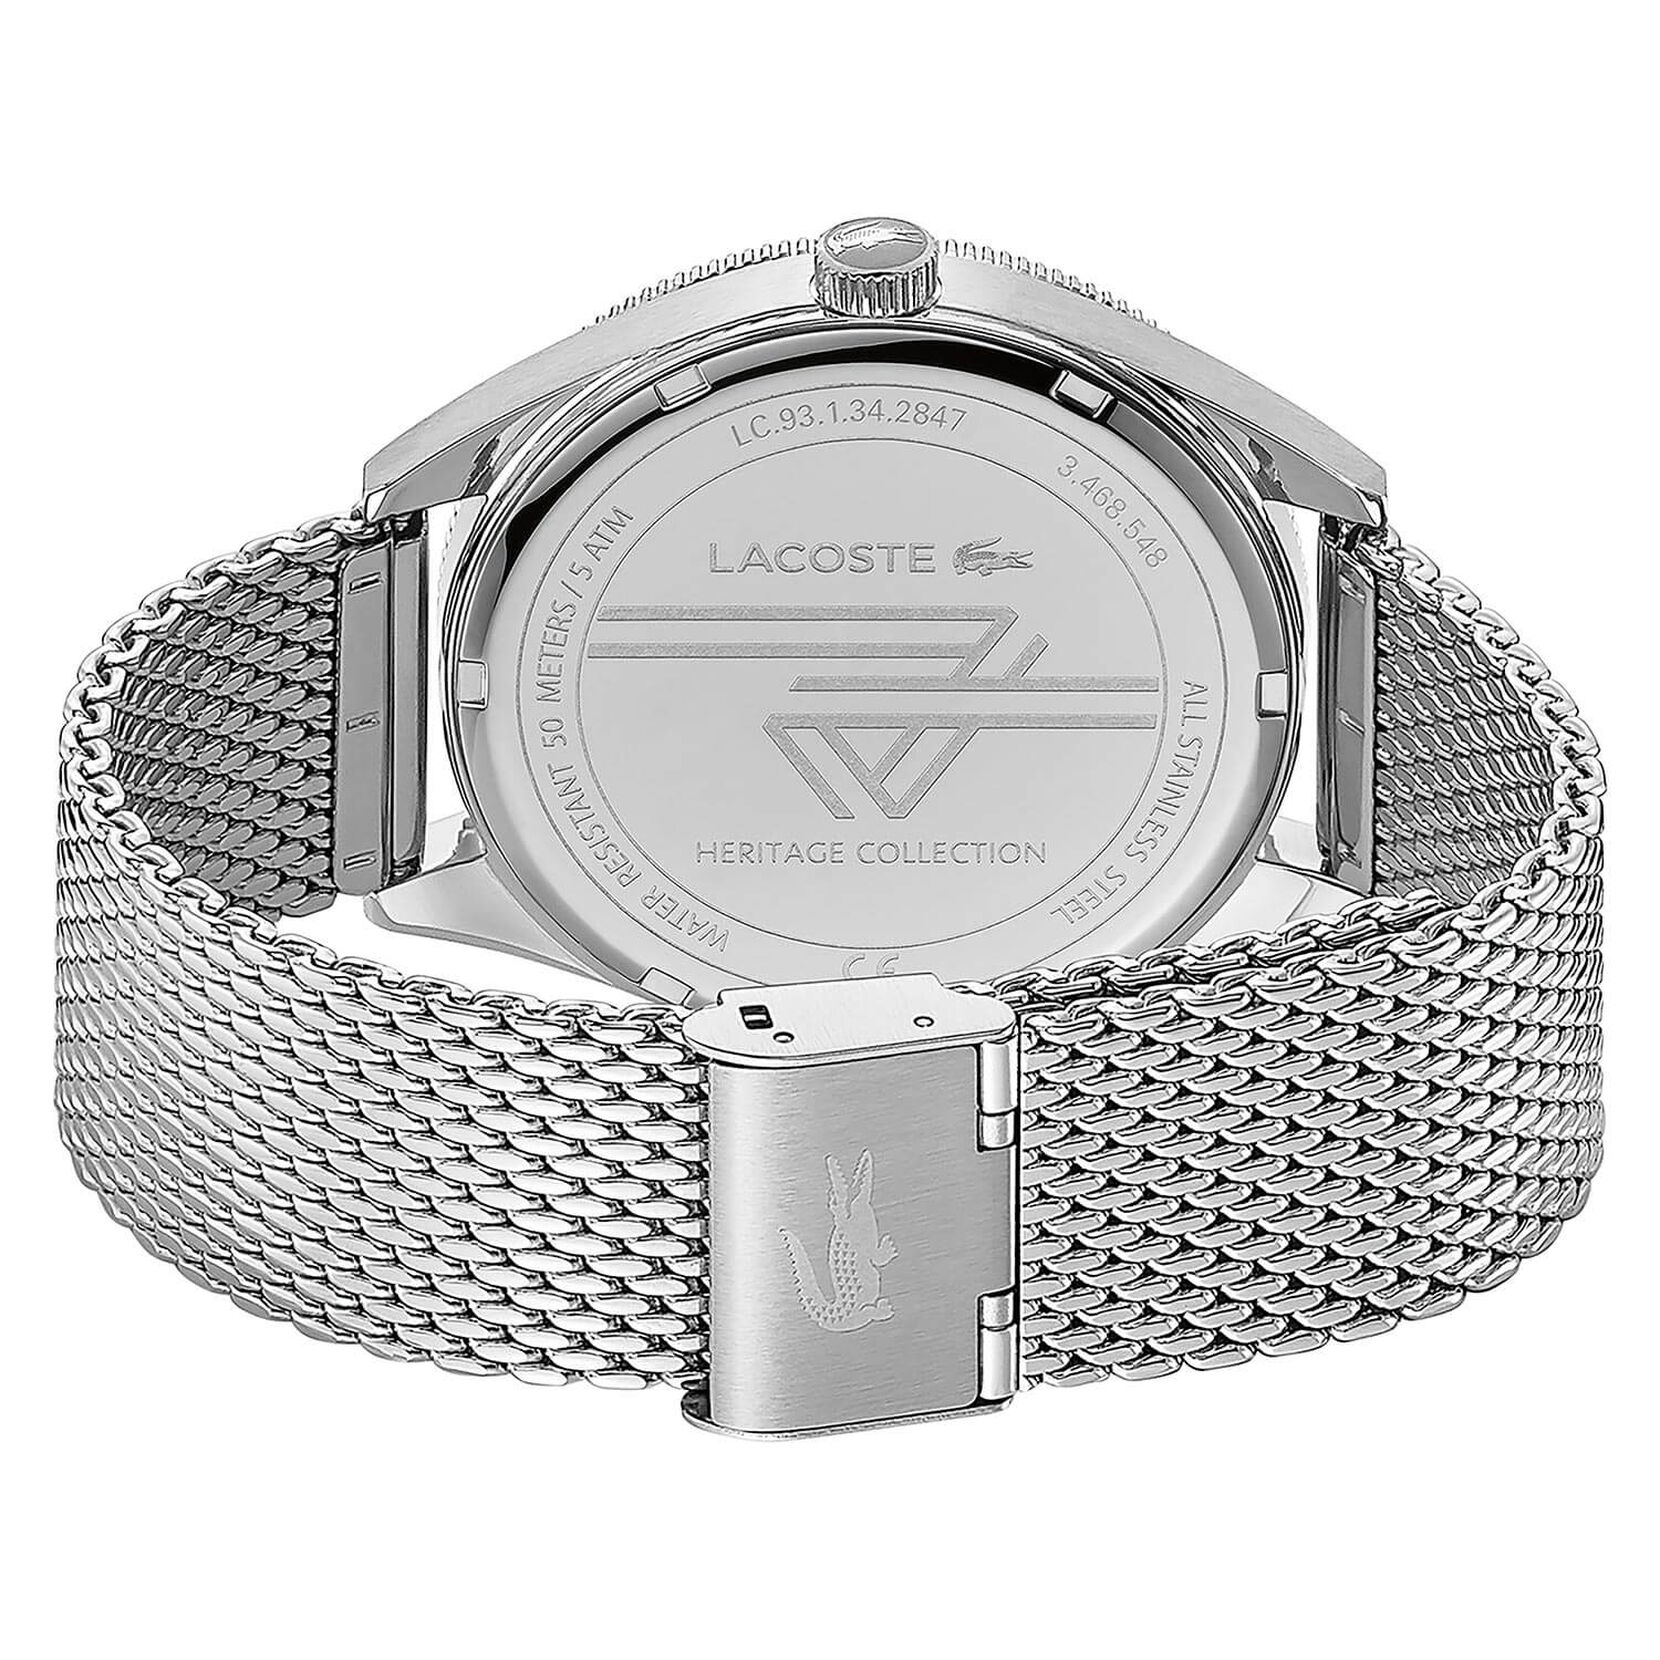 Lacoste | Movado Company Store|Men's Lacoste Heritage stainless steel mesh  watch with blue